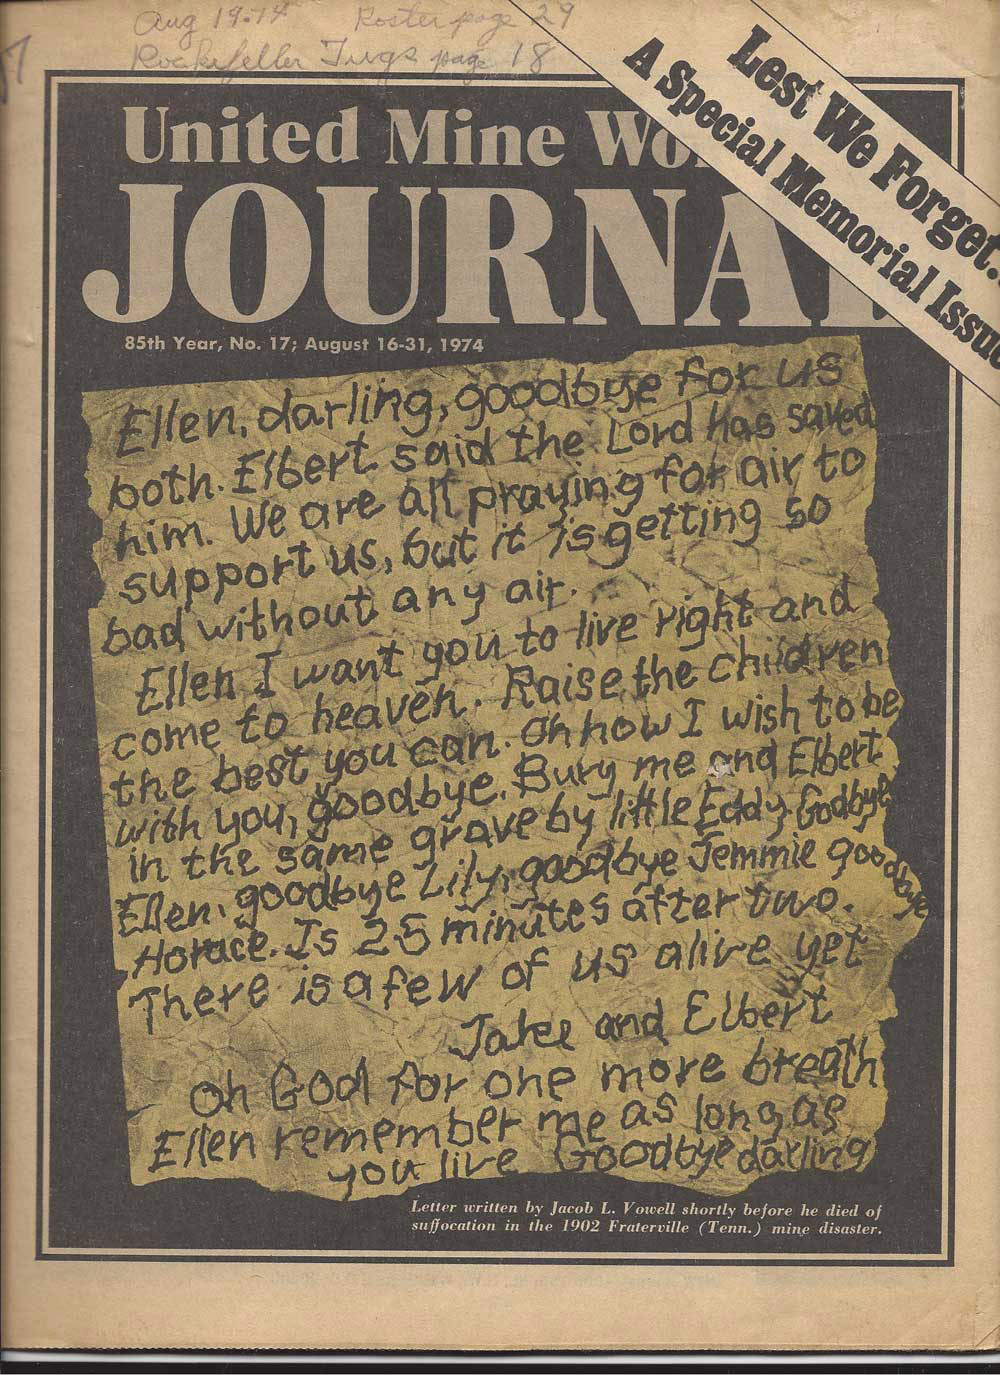 The United Mine Workers Journal August 17, 1974 cover showing a letter written by a fatally trapped miner after a collapse in West Virginia. (Little Cities of Black Diamonds Archive) 